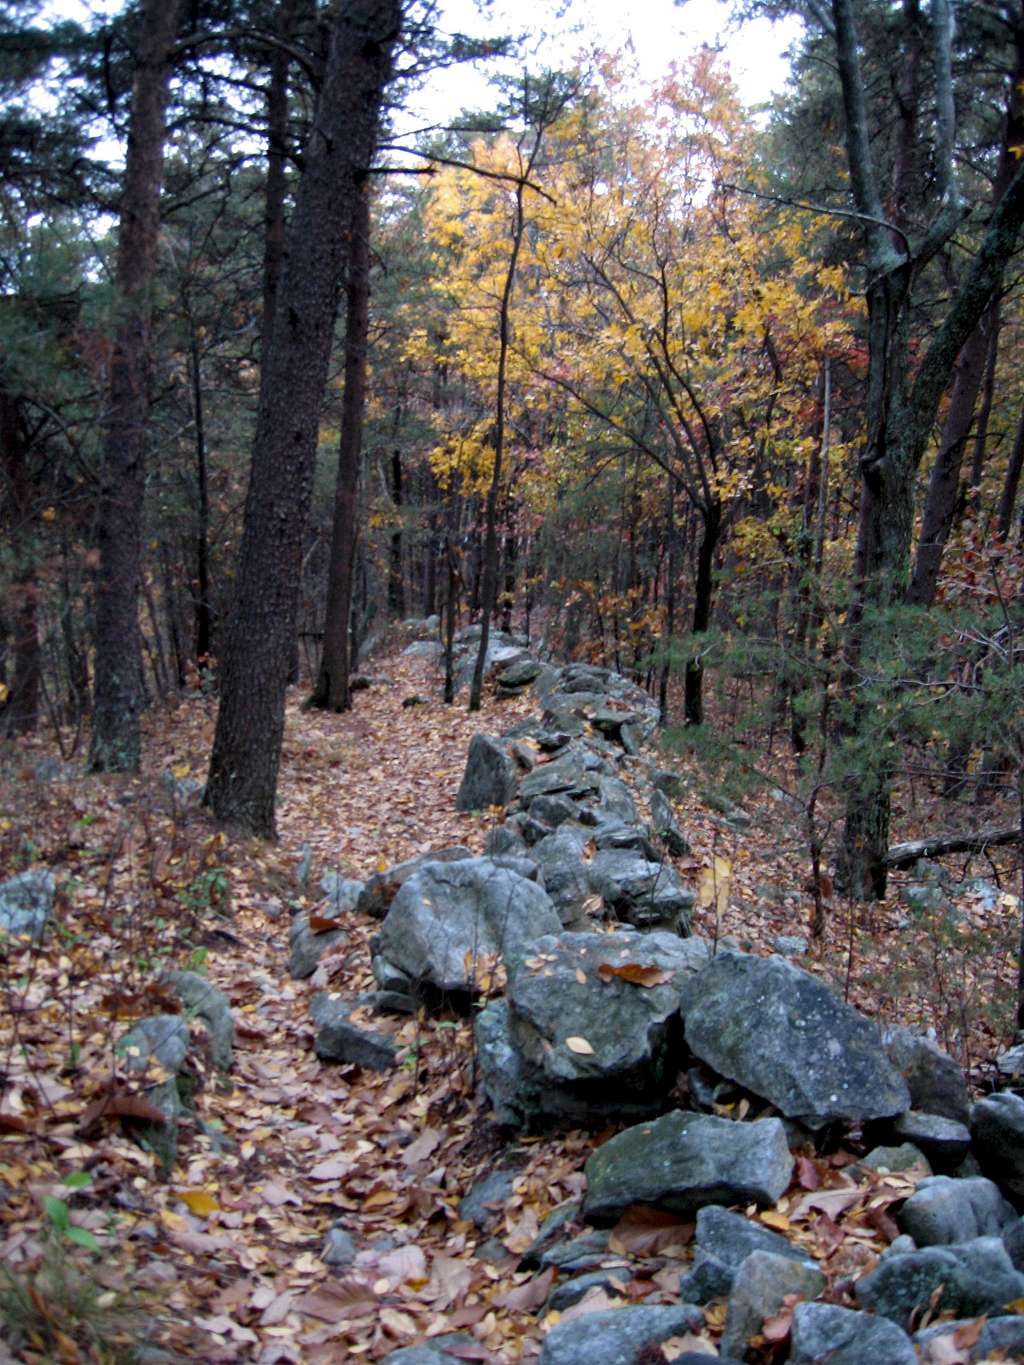 Another view of the stone wall at Dug Mountain